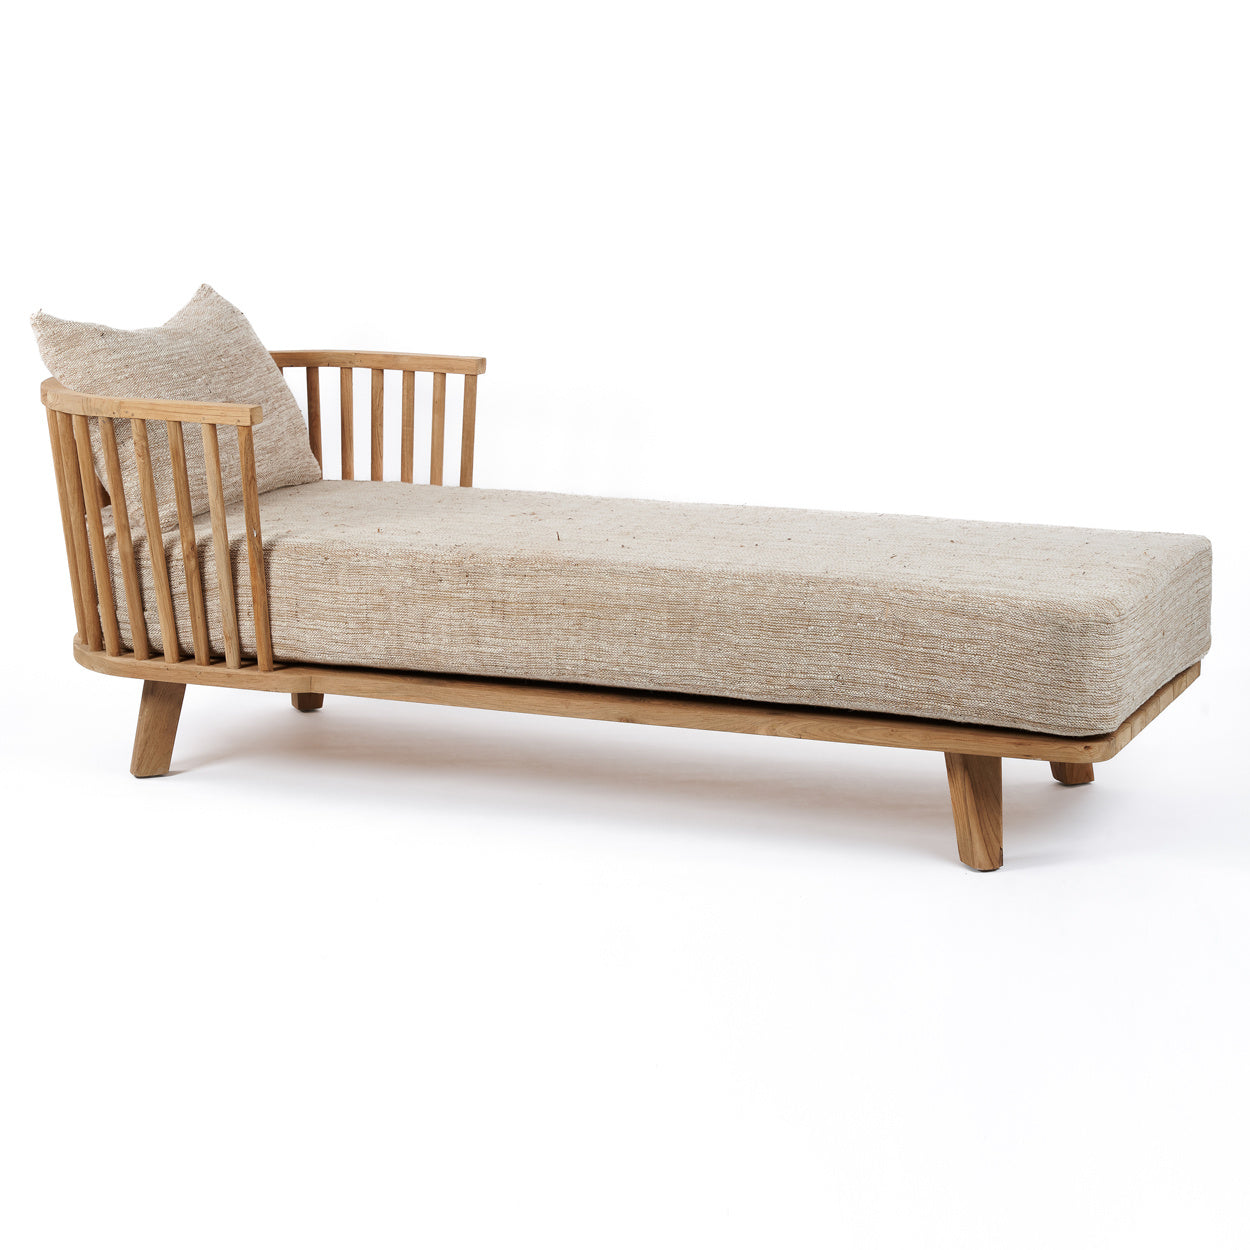 THE MALAWI Daybed Natural Beige